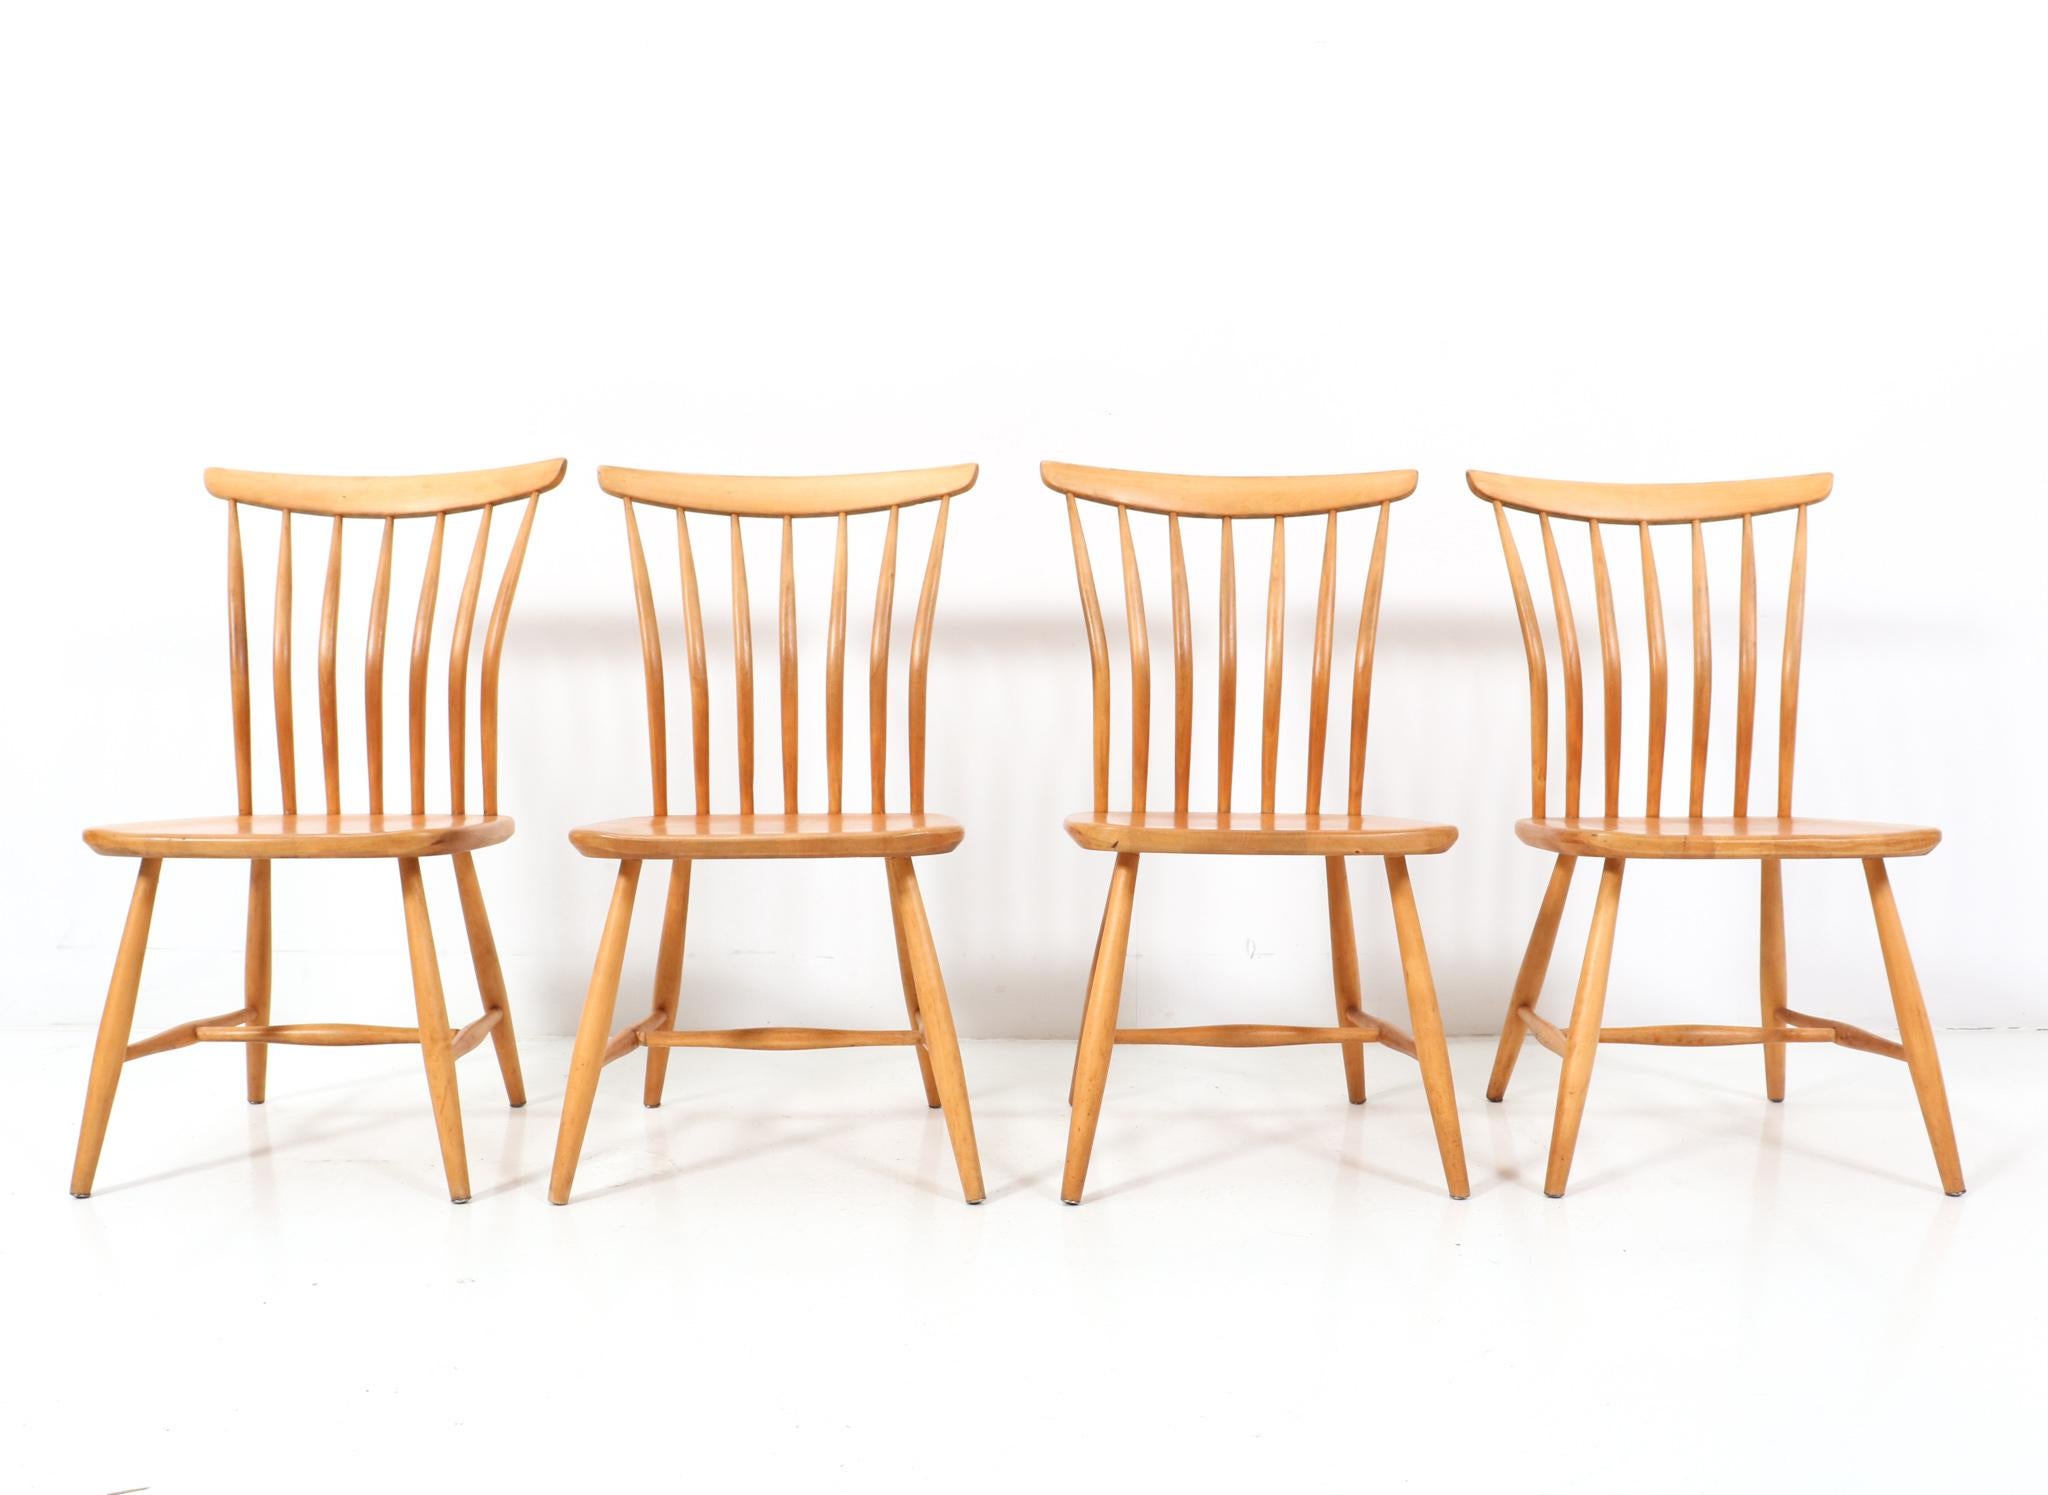 Stunning set of four Mid-Century Modern dining room chairs.
Design by Bengt Akerblom & Gunnar Eklöf for Akerblom Stolen.
Striking Swedish design from the 1950s.
Solid birch frames and all four chairs are marked with the original manufacturers